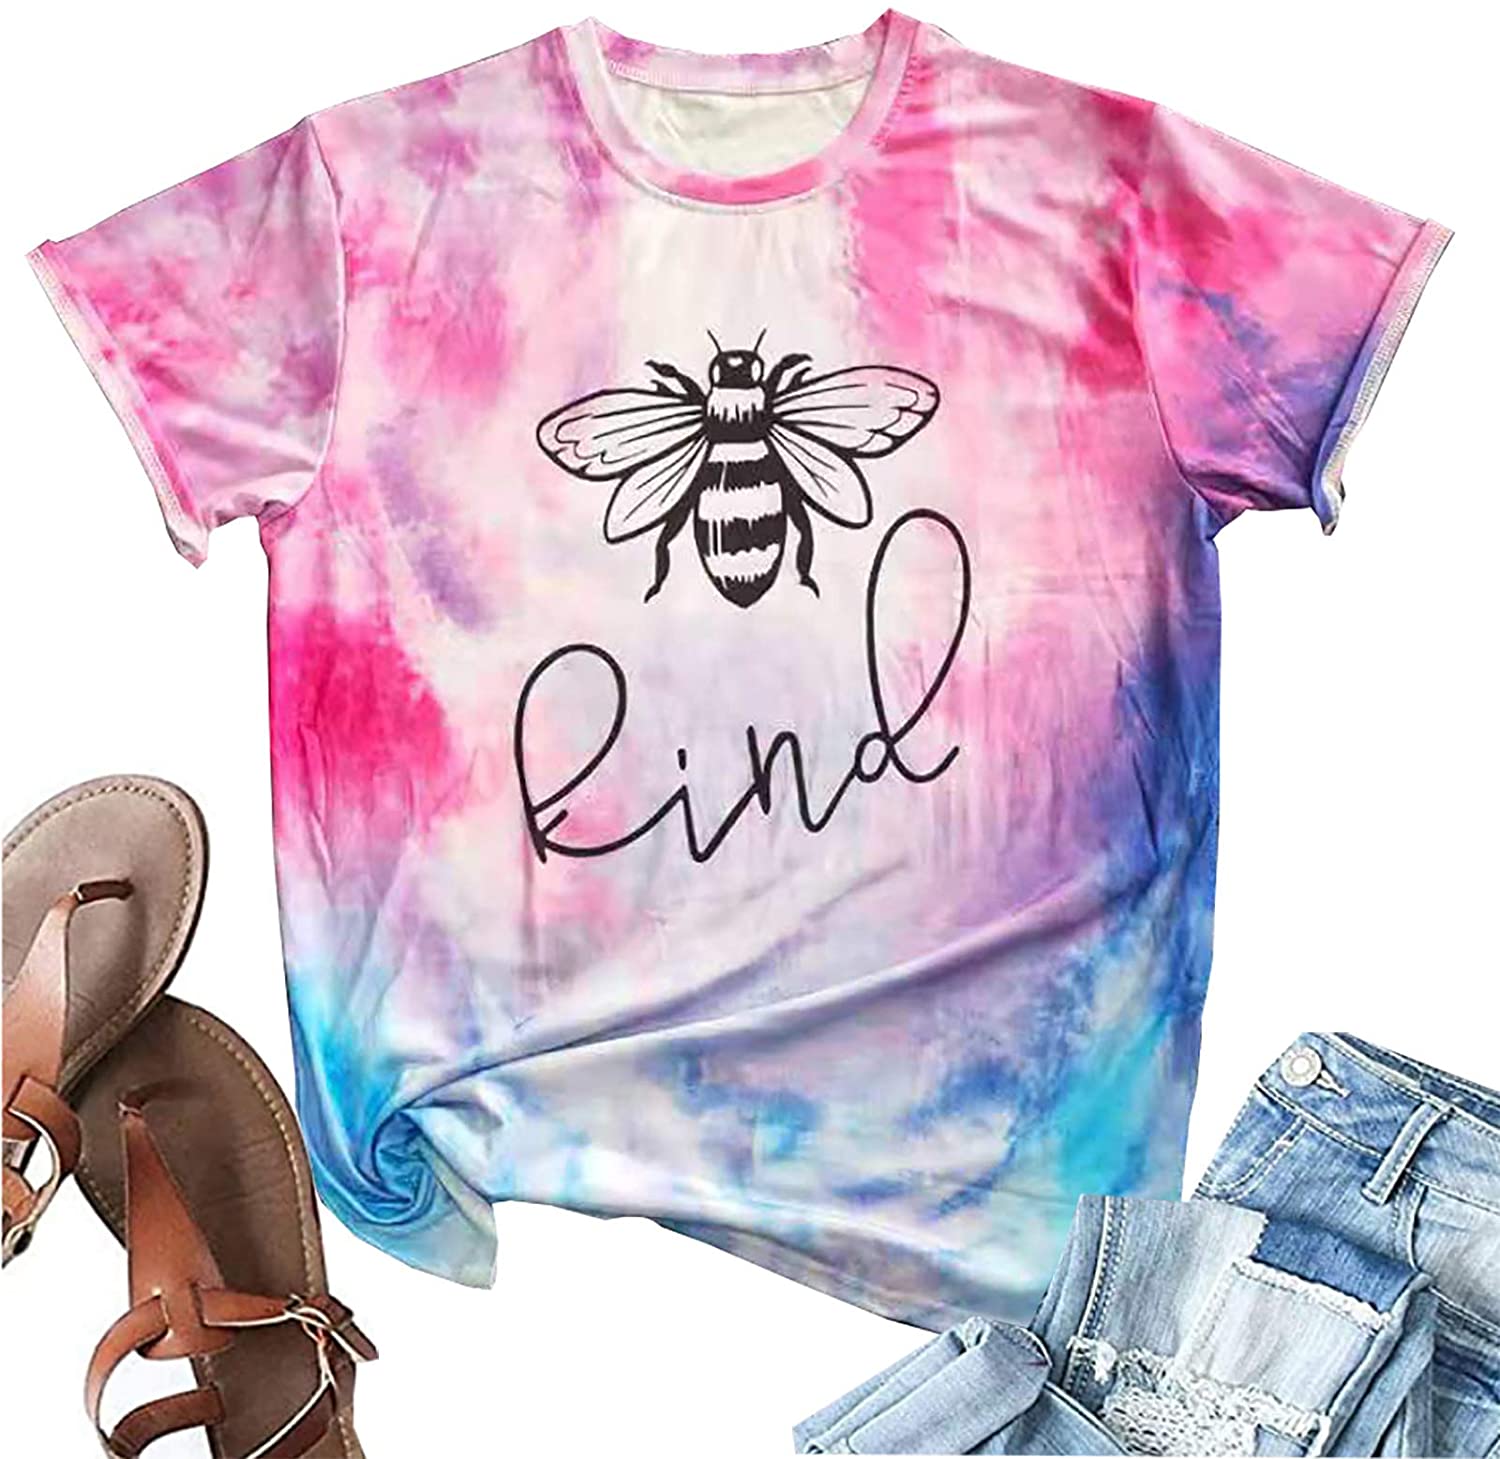 Be Kind Shirt for Women Tie Dye T Shirts Bee Kind Short Sleeve Graphic Tees  Tops | eBay